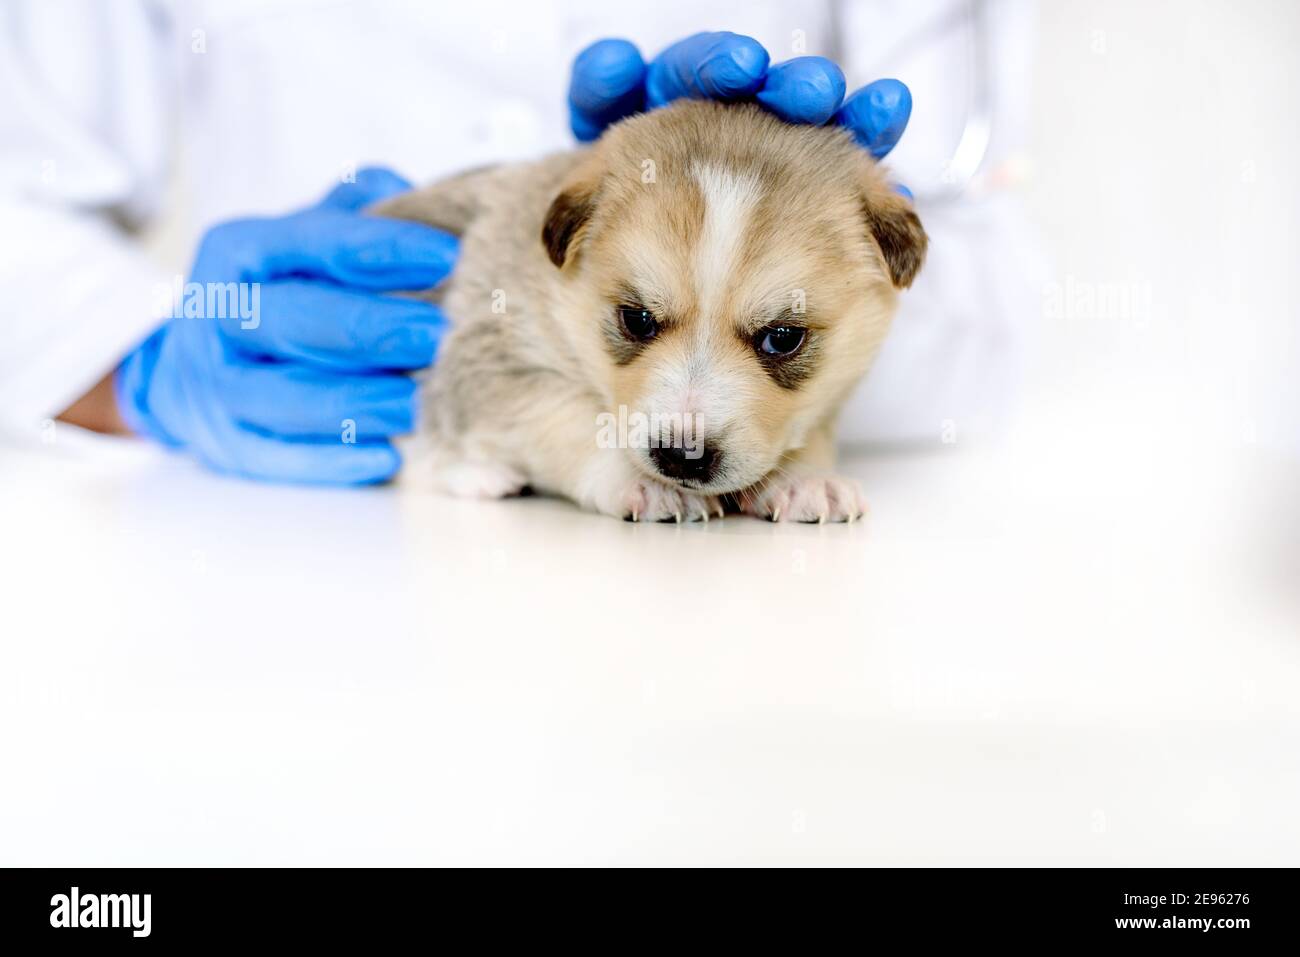 Smiling veterinarian examining a cute dog in medical office.Pet care in veterinary clinic. Mongrel, purebred dog Stock Photo